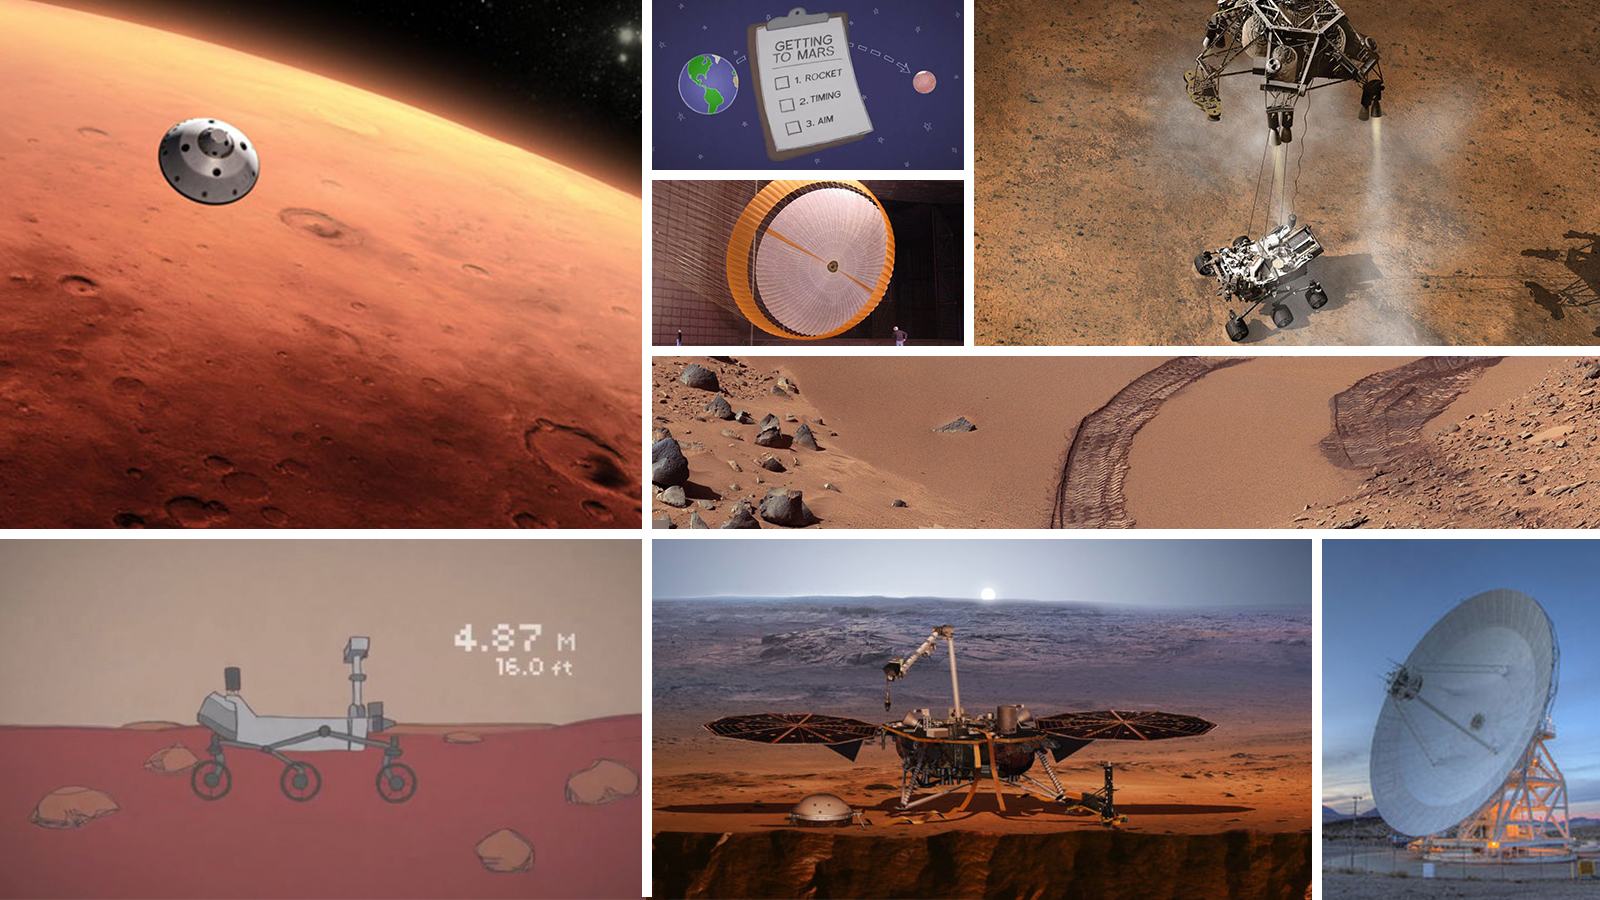 Mission To Mars Worksheet Answers - Escolagersonalvesgui